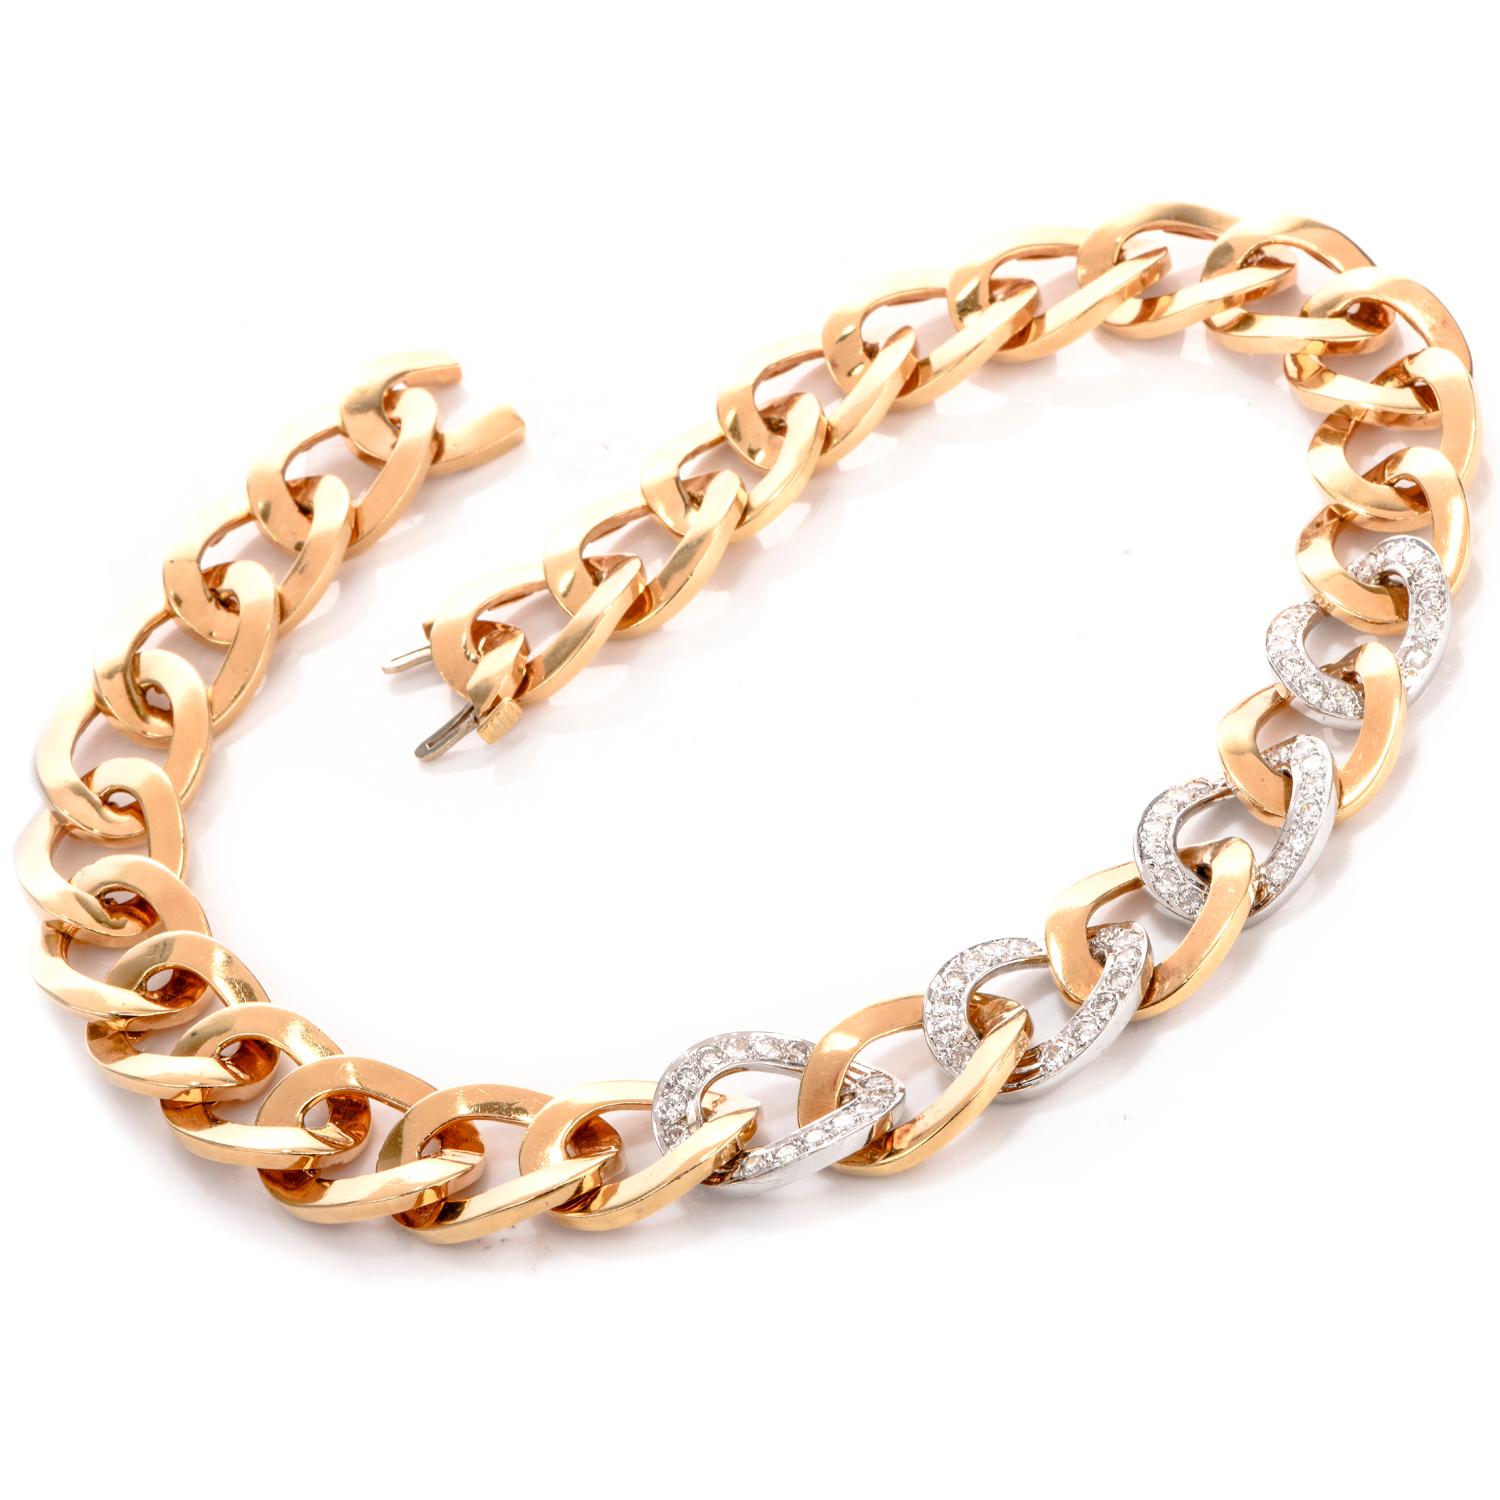 Large interconnecting oval links create the design of this

Bold Diamond Choker Necklace.

Crafted in both 18K yellow and white gold weighing approx. 109.1 grams.
 This choker measures approx. 15.59mm x 15 Inches long and is 

adorned in the white